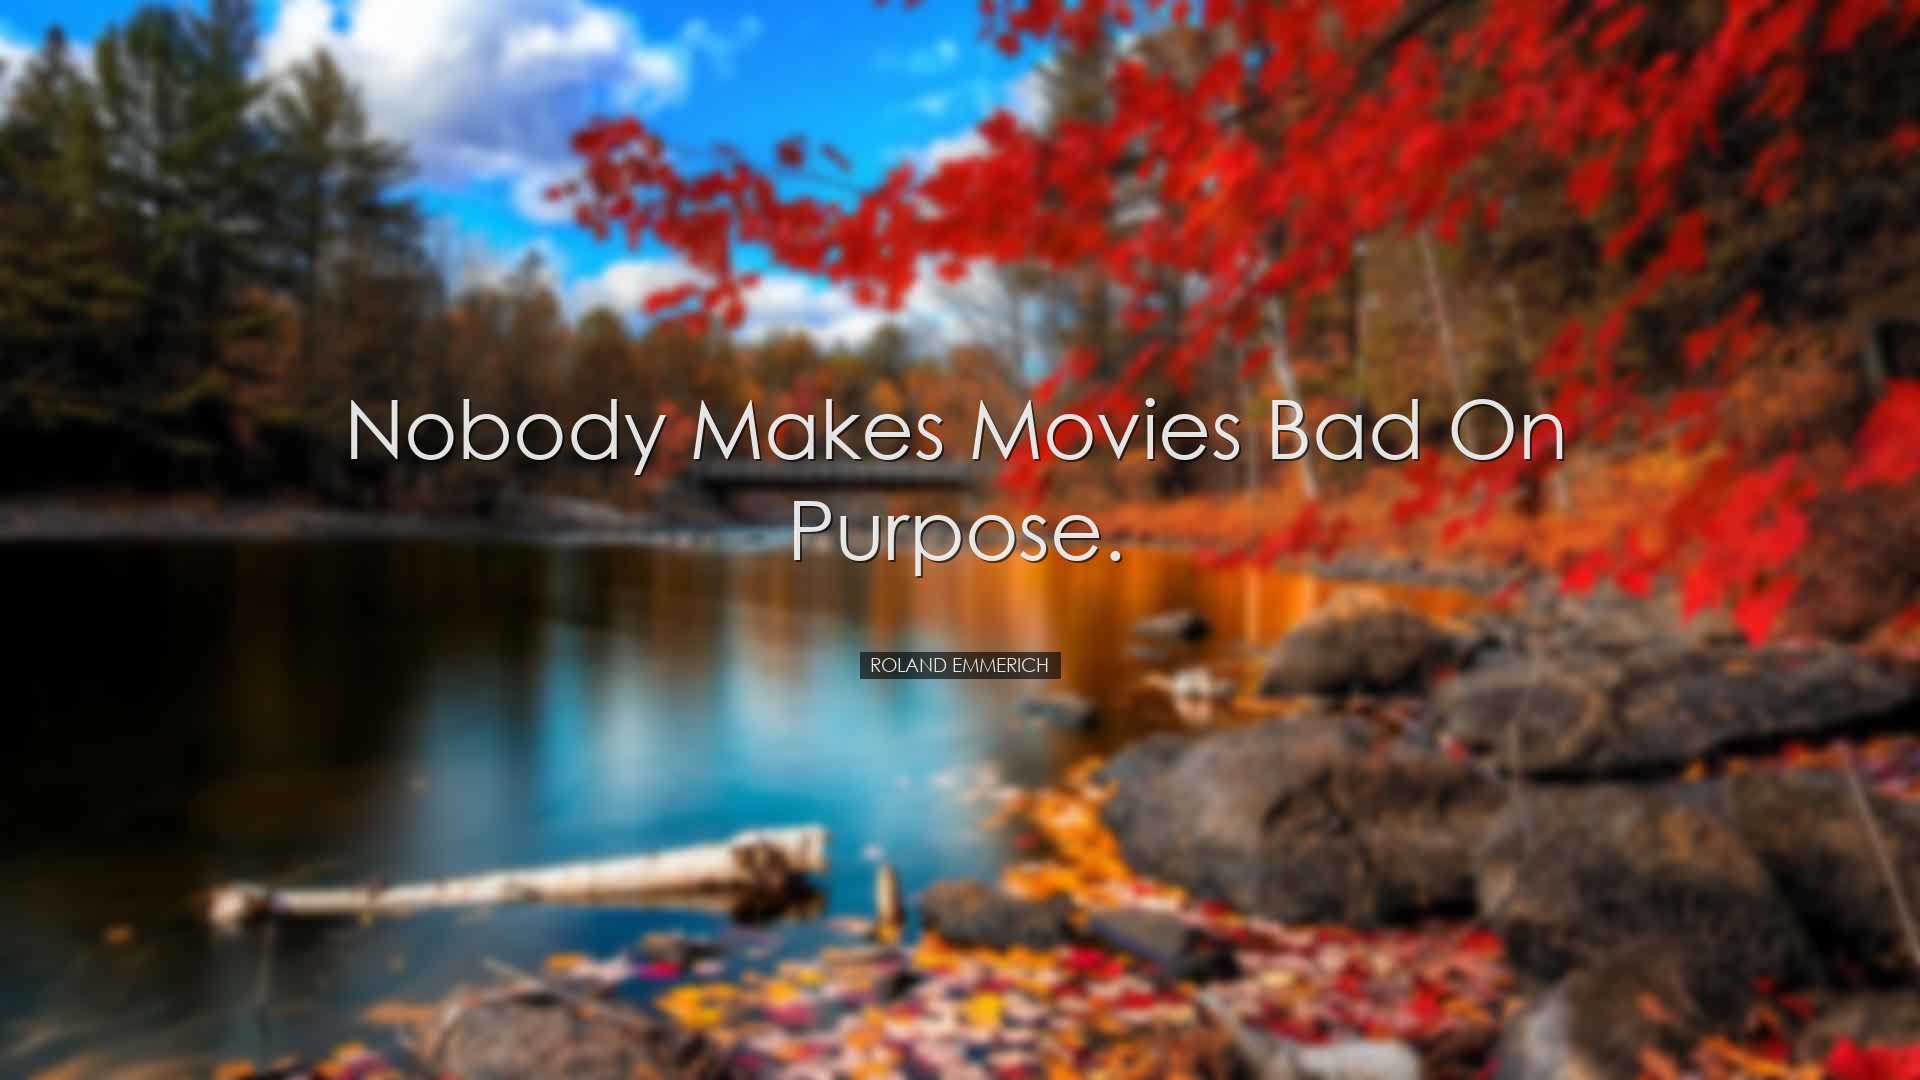 Nobody makes movies bad on purpose. - Roland Emmerich